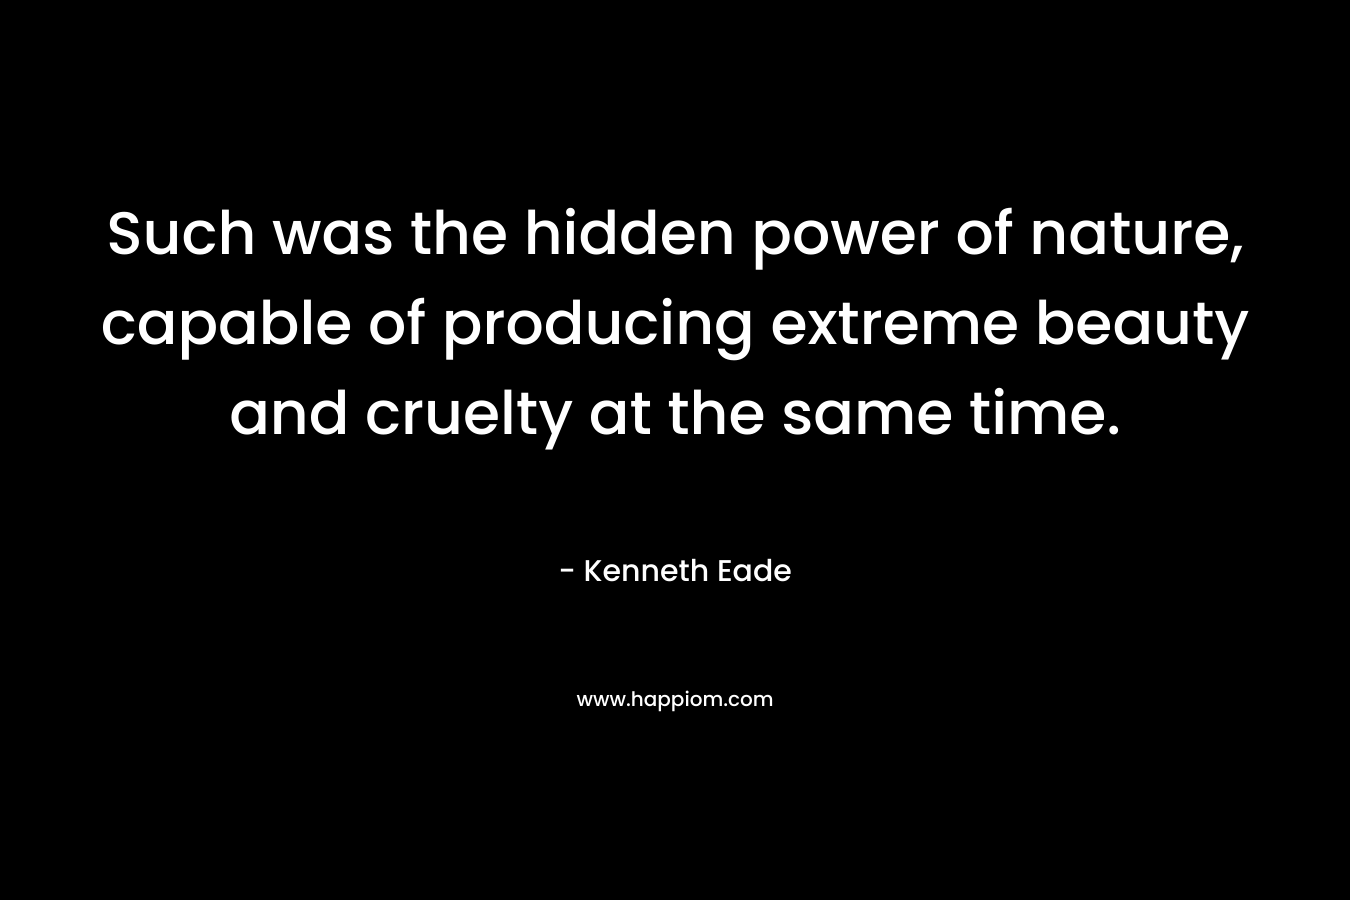 Such was the hidden power of nature, capable of producing extreme beauty and cruelty at the same time.